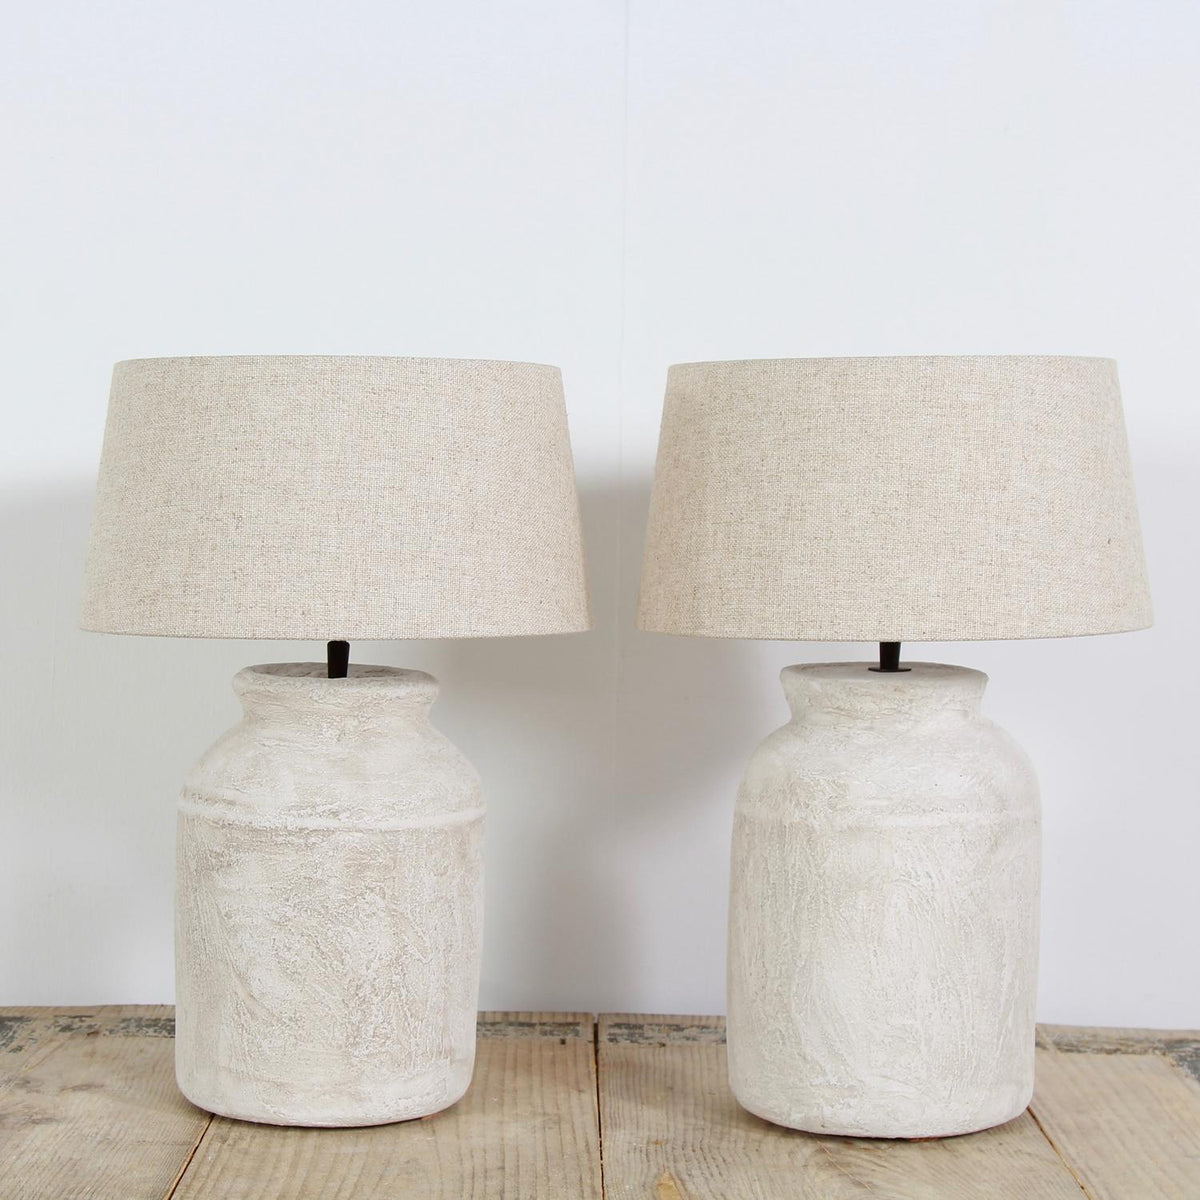 Pair of Stylish Ceramic Lamps with Belgian Linen Shades